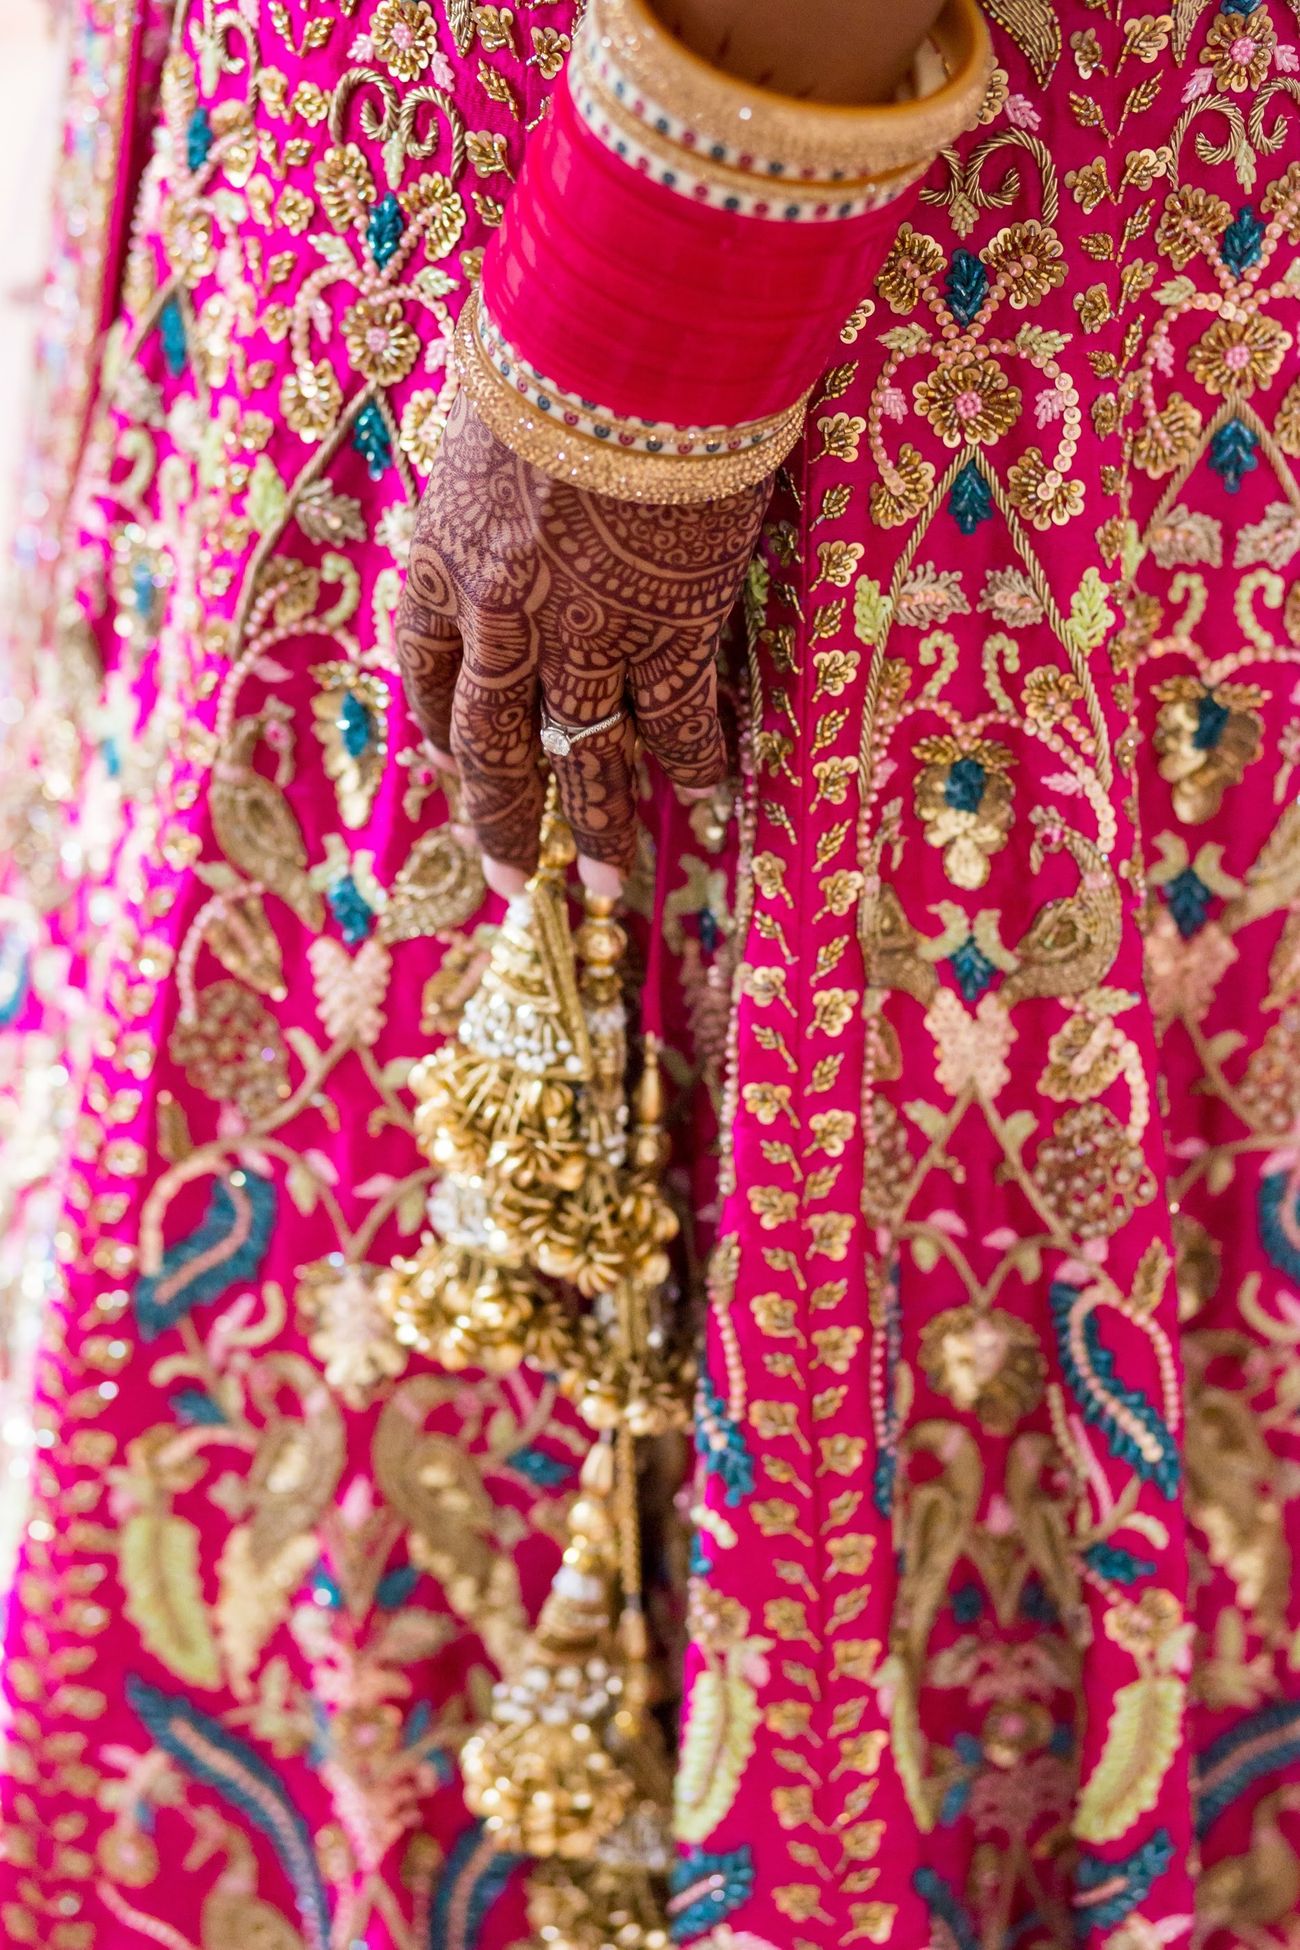 Indian-American Vineyard Wedding With Customised Outfits & Jewellery ...